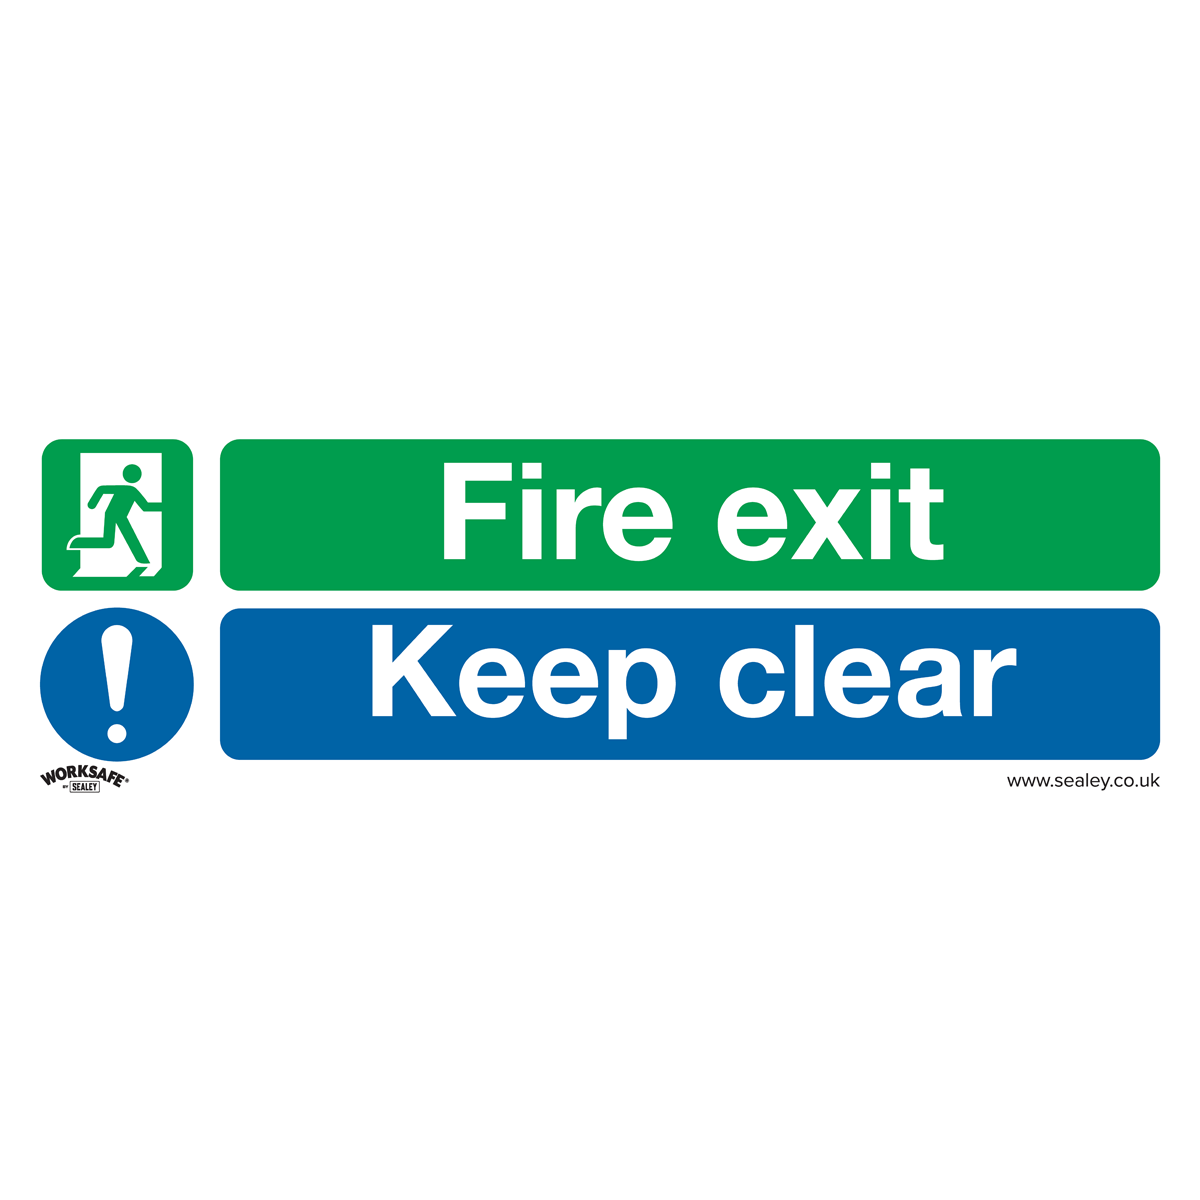 Safe Conditions Safety Sign - Fire Exit Keep Clear (Large) - Rigid Plastic - Pack of 10 - SS32P10 - Farming Parts